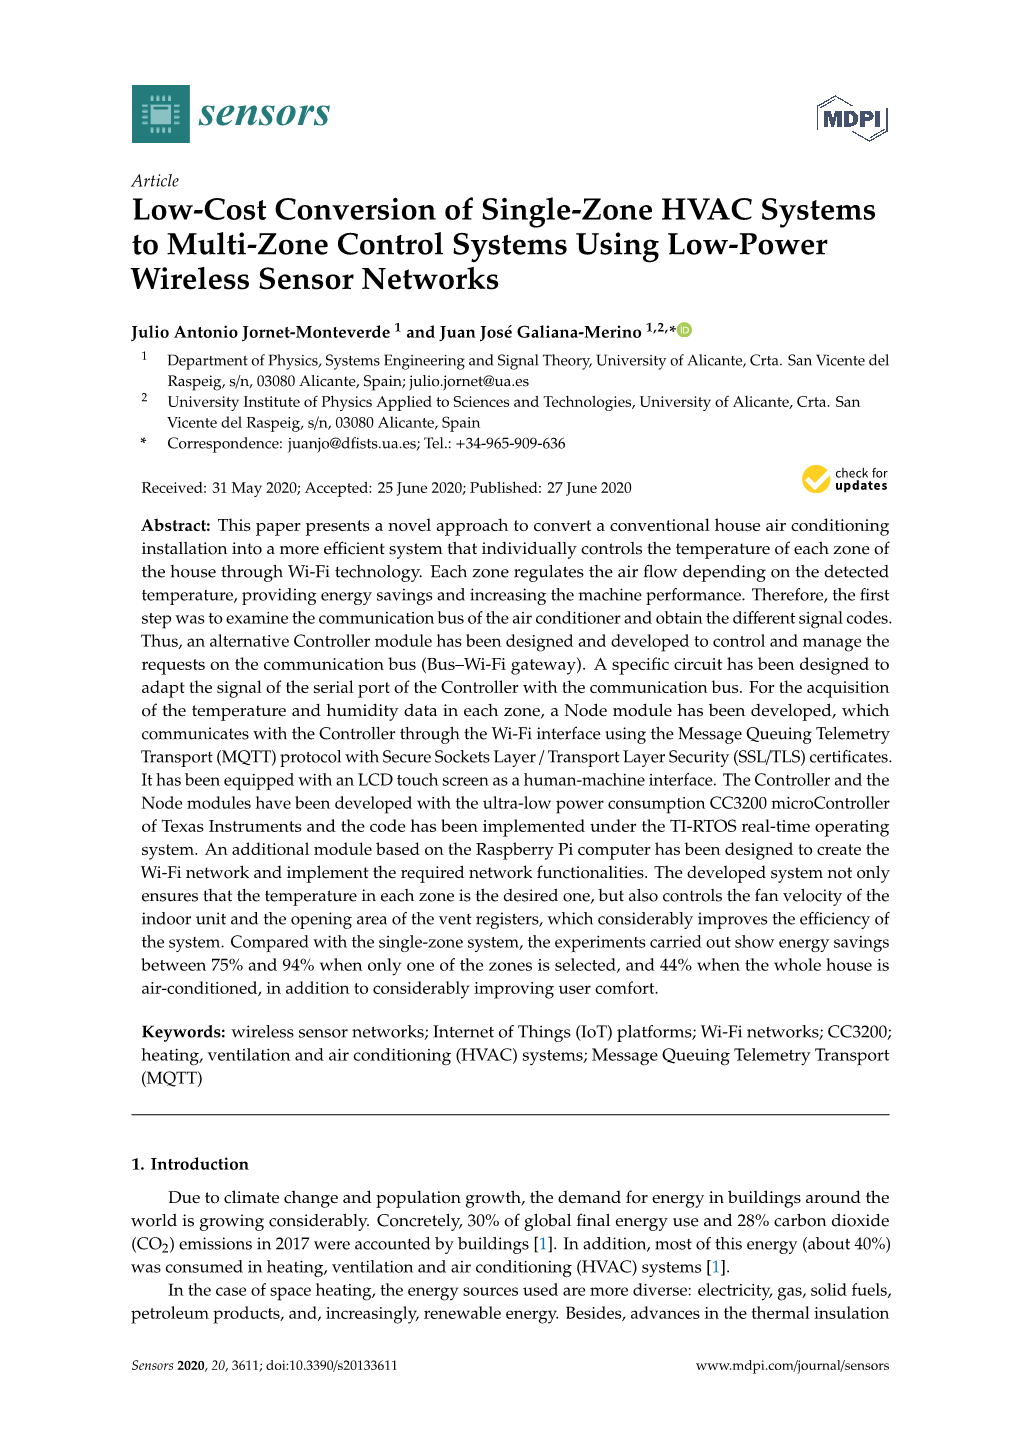 Low-Cost Conversion of Single-Zone HVAC Systems to Multi-Zone Control Systems Using Low-Power Wireless Sensor Networks